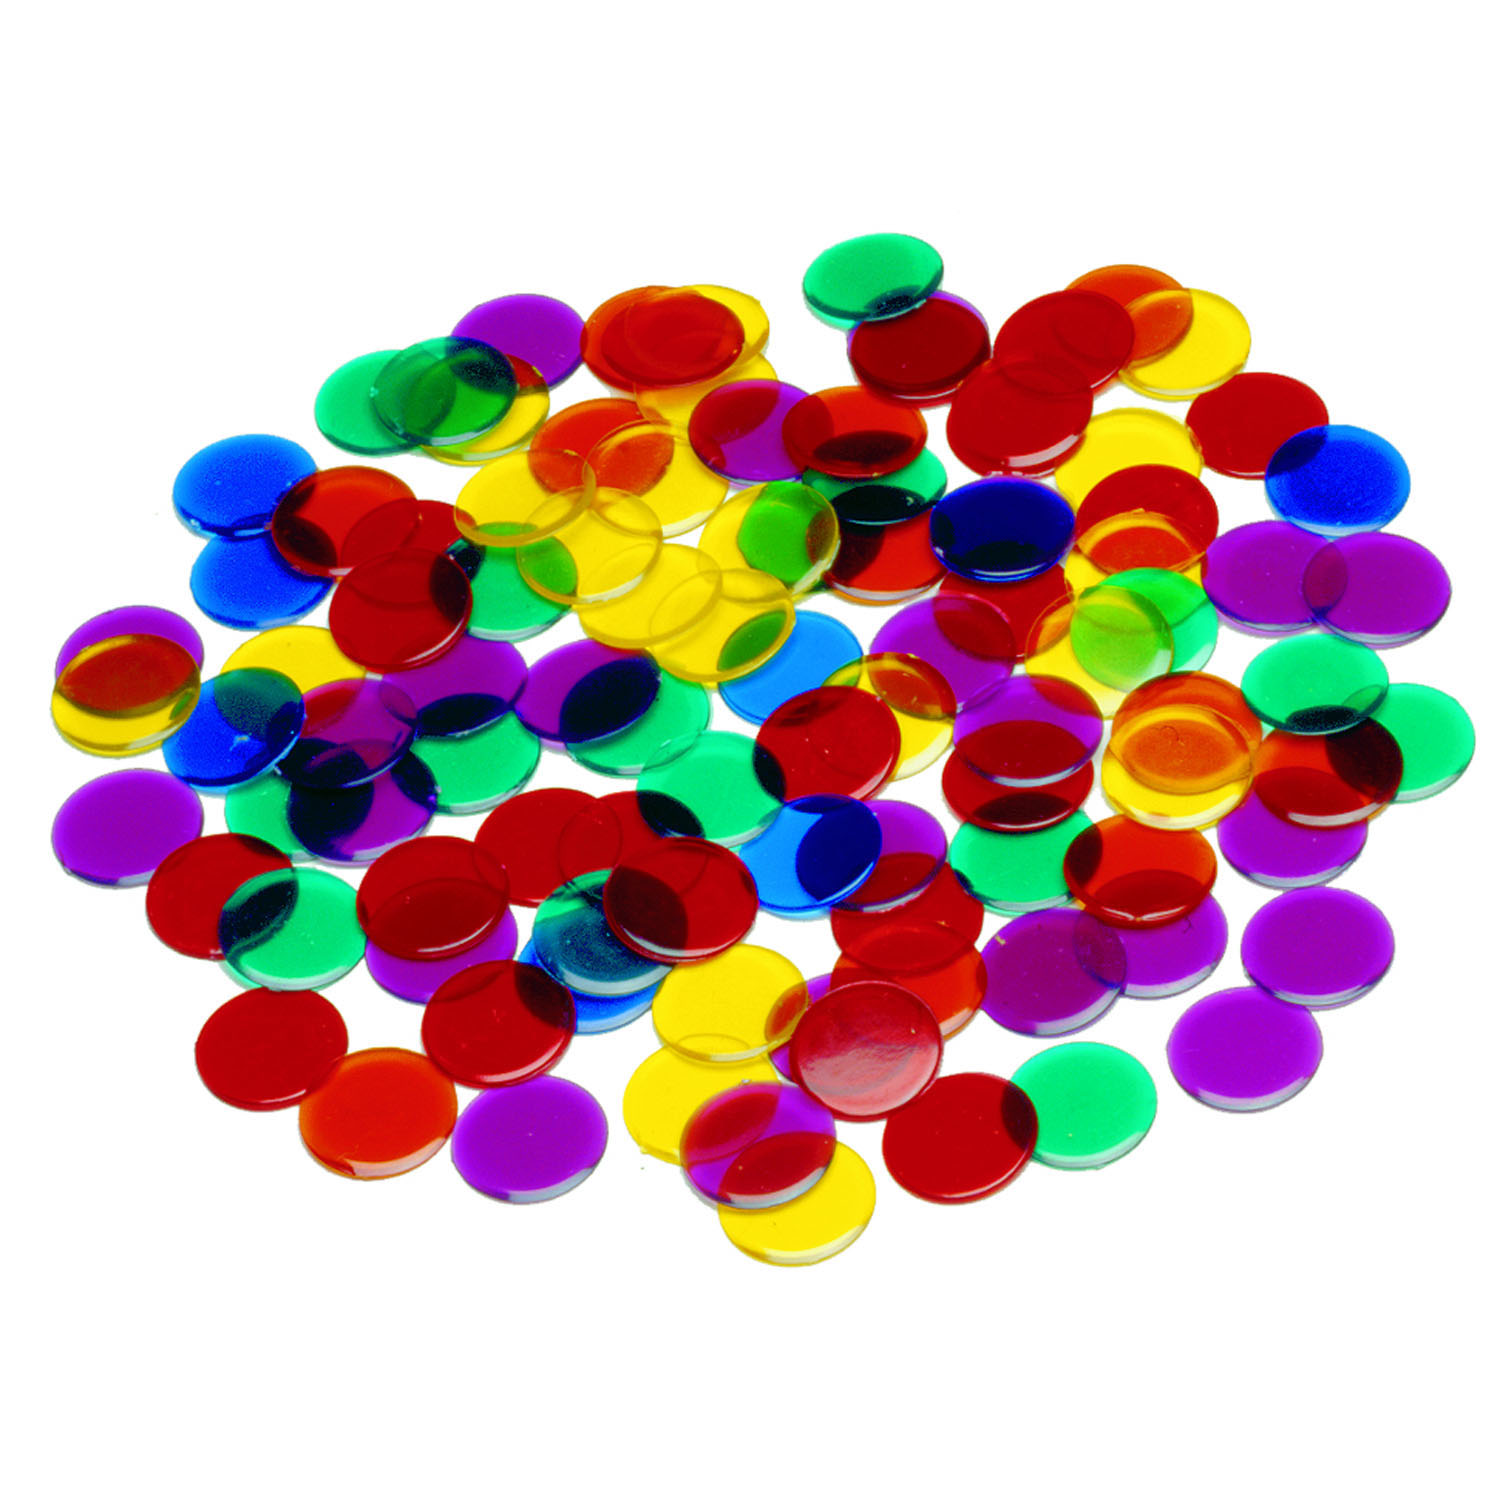 Transparent Counters - .75" - Set of 1,000